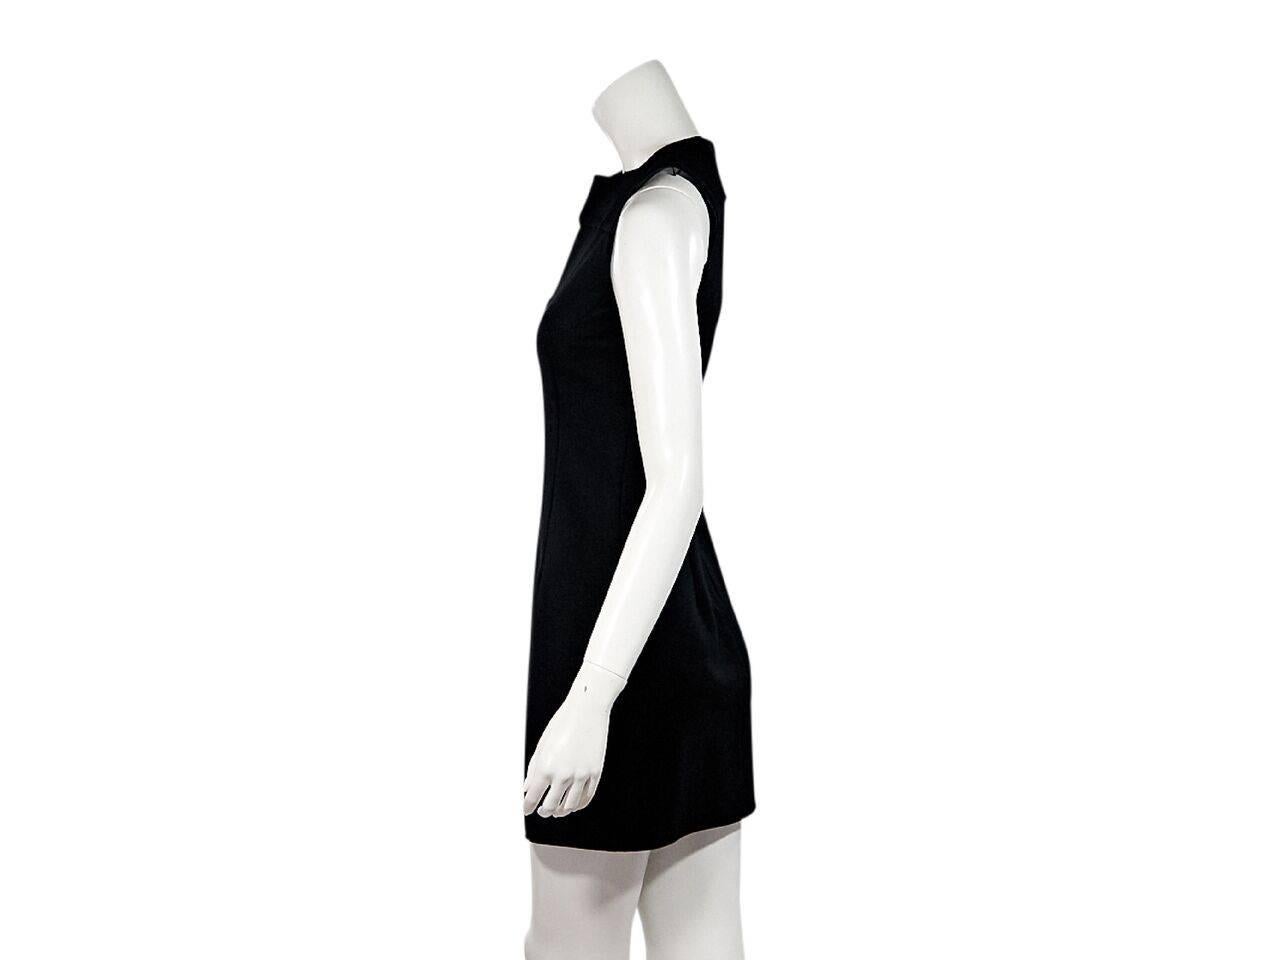 Product details:  Black sheath dress by Prada.  Roundneck.  Sleeveless.  Seam work creates a flattering silhouette.  Exposed back zip closure.  
Condition: Pre-owned. Very good.
Est. Retail $ 1,198.00